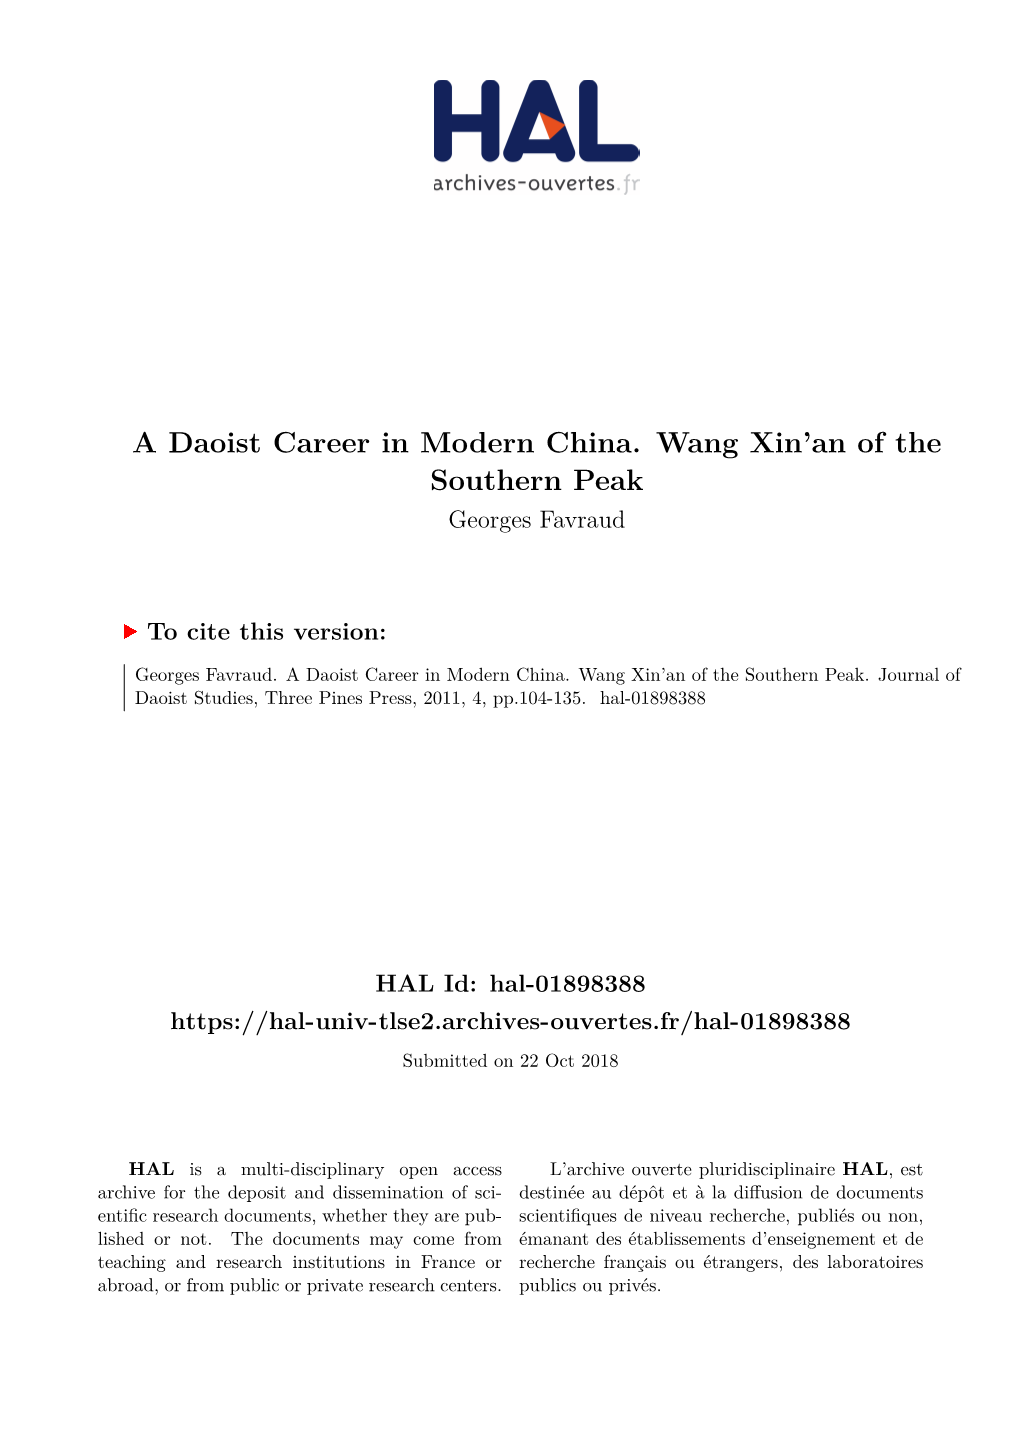 A Daoist Career in Modern China. Wang Xin'an of the Southern Peak